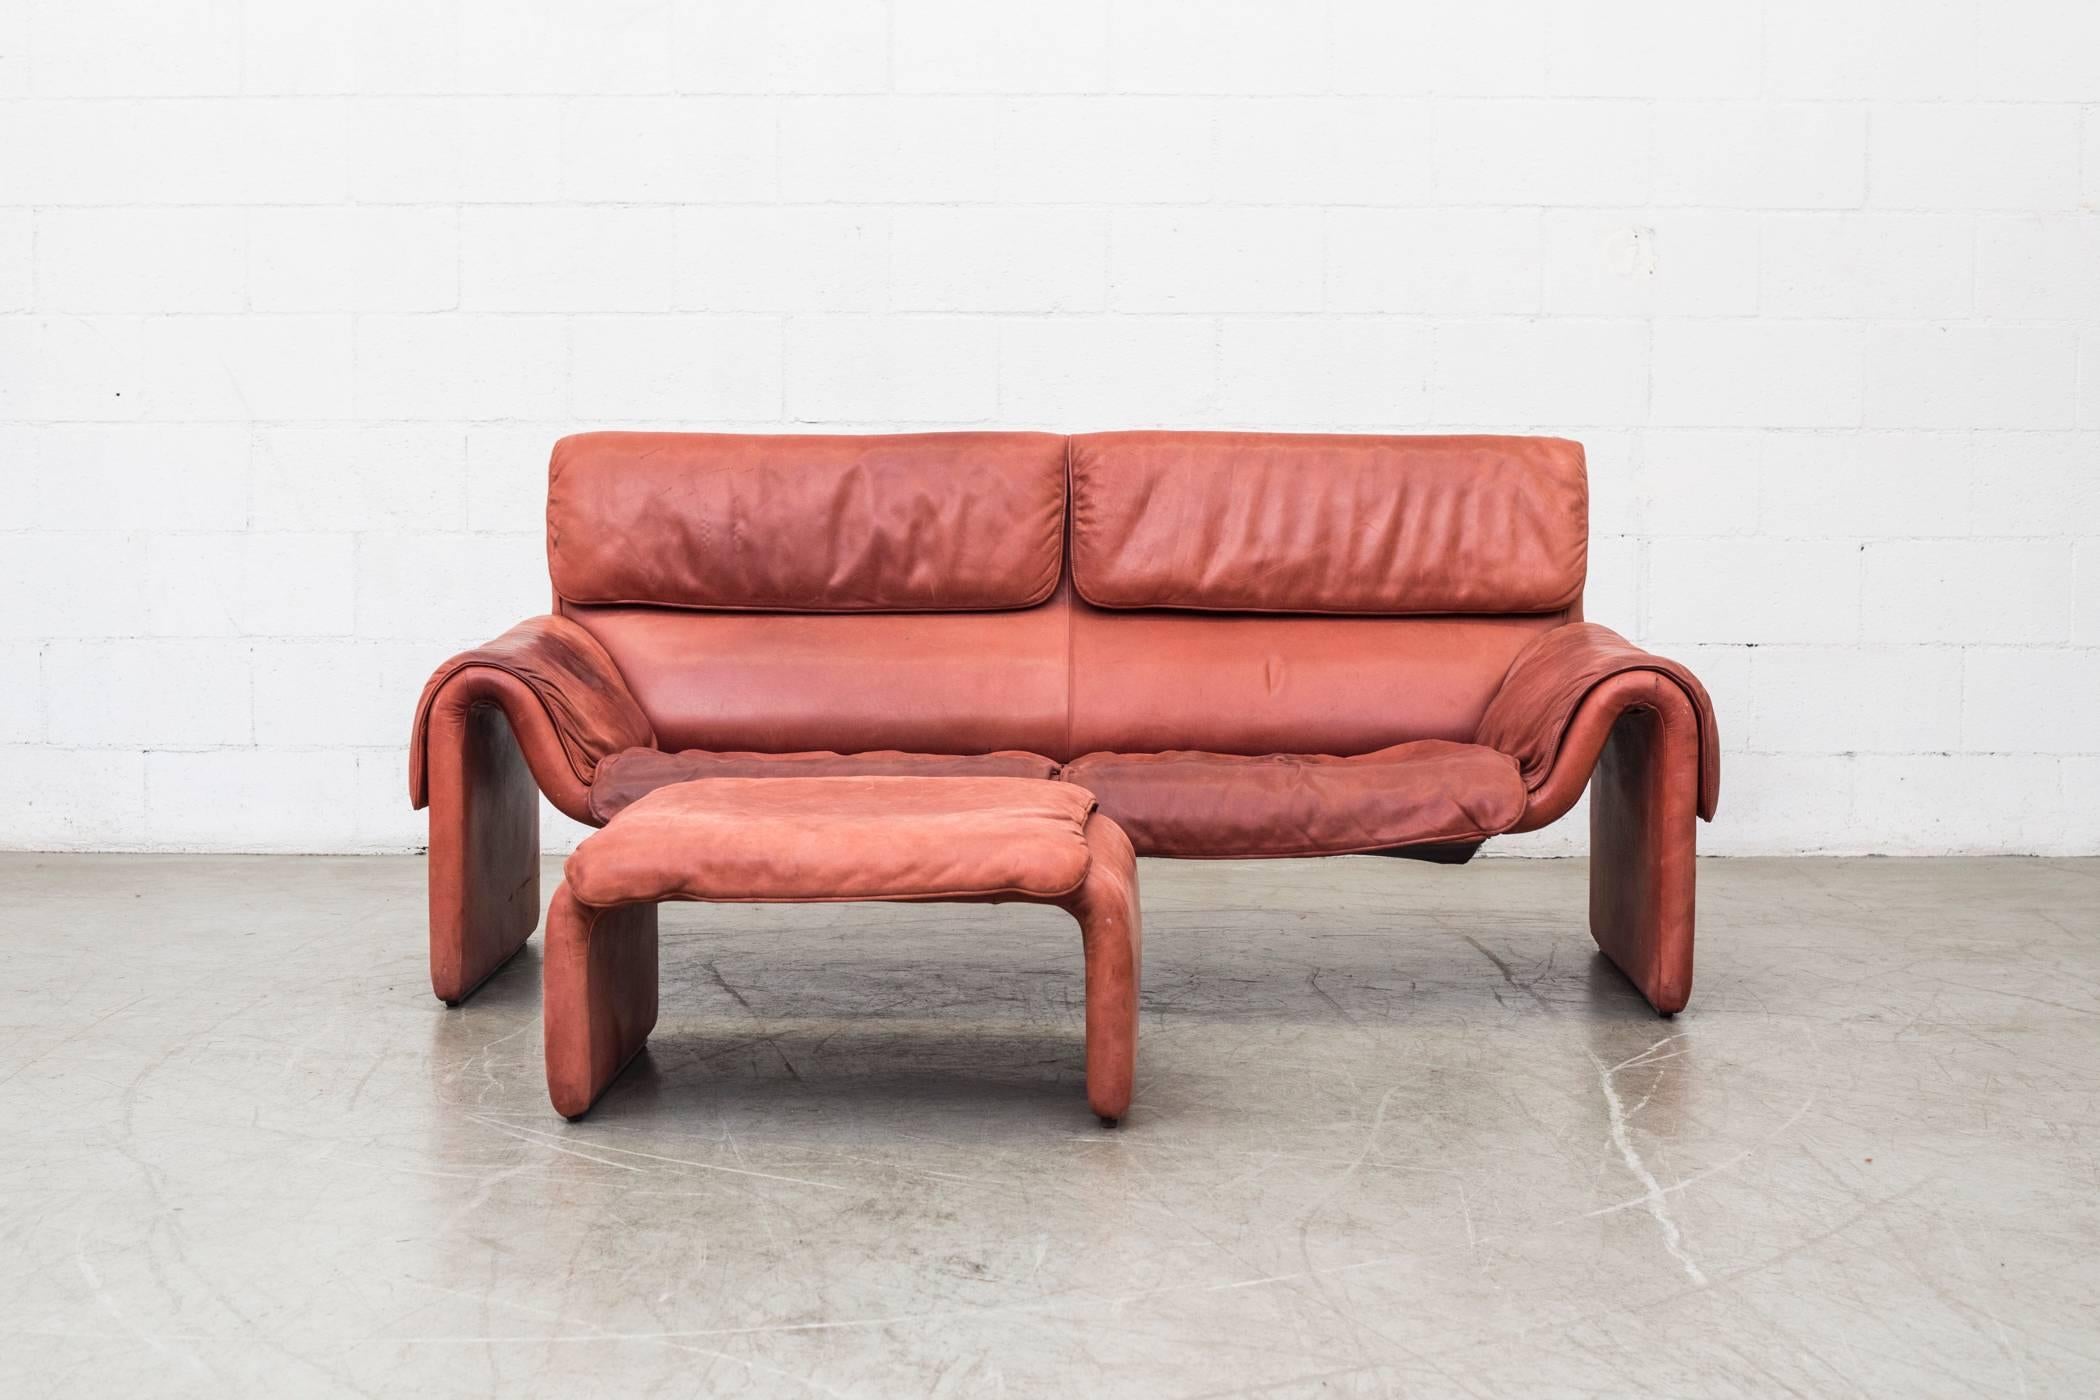 Soft leather sofa with matching ottoman in salmon color by Elastoform. Original condition with visible wear and staining consistent with its age and usage. Ottoman measures 27.5 x 25.5 x 14.5. Sold as set.